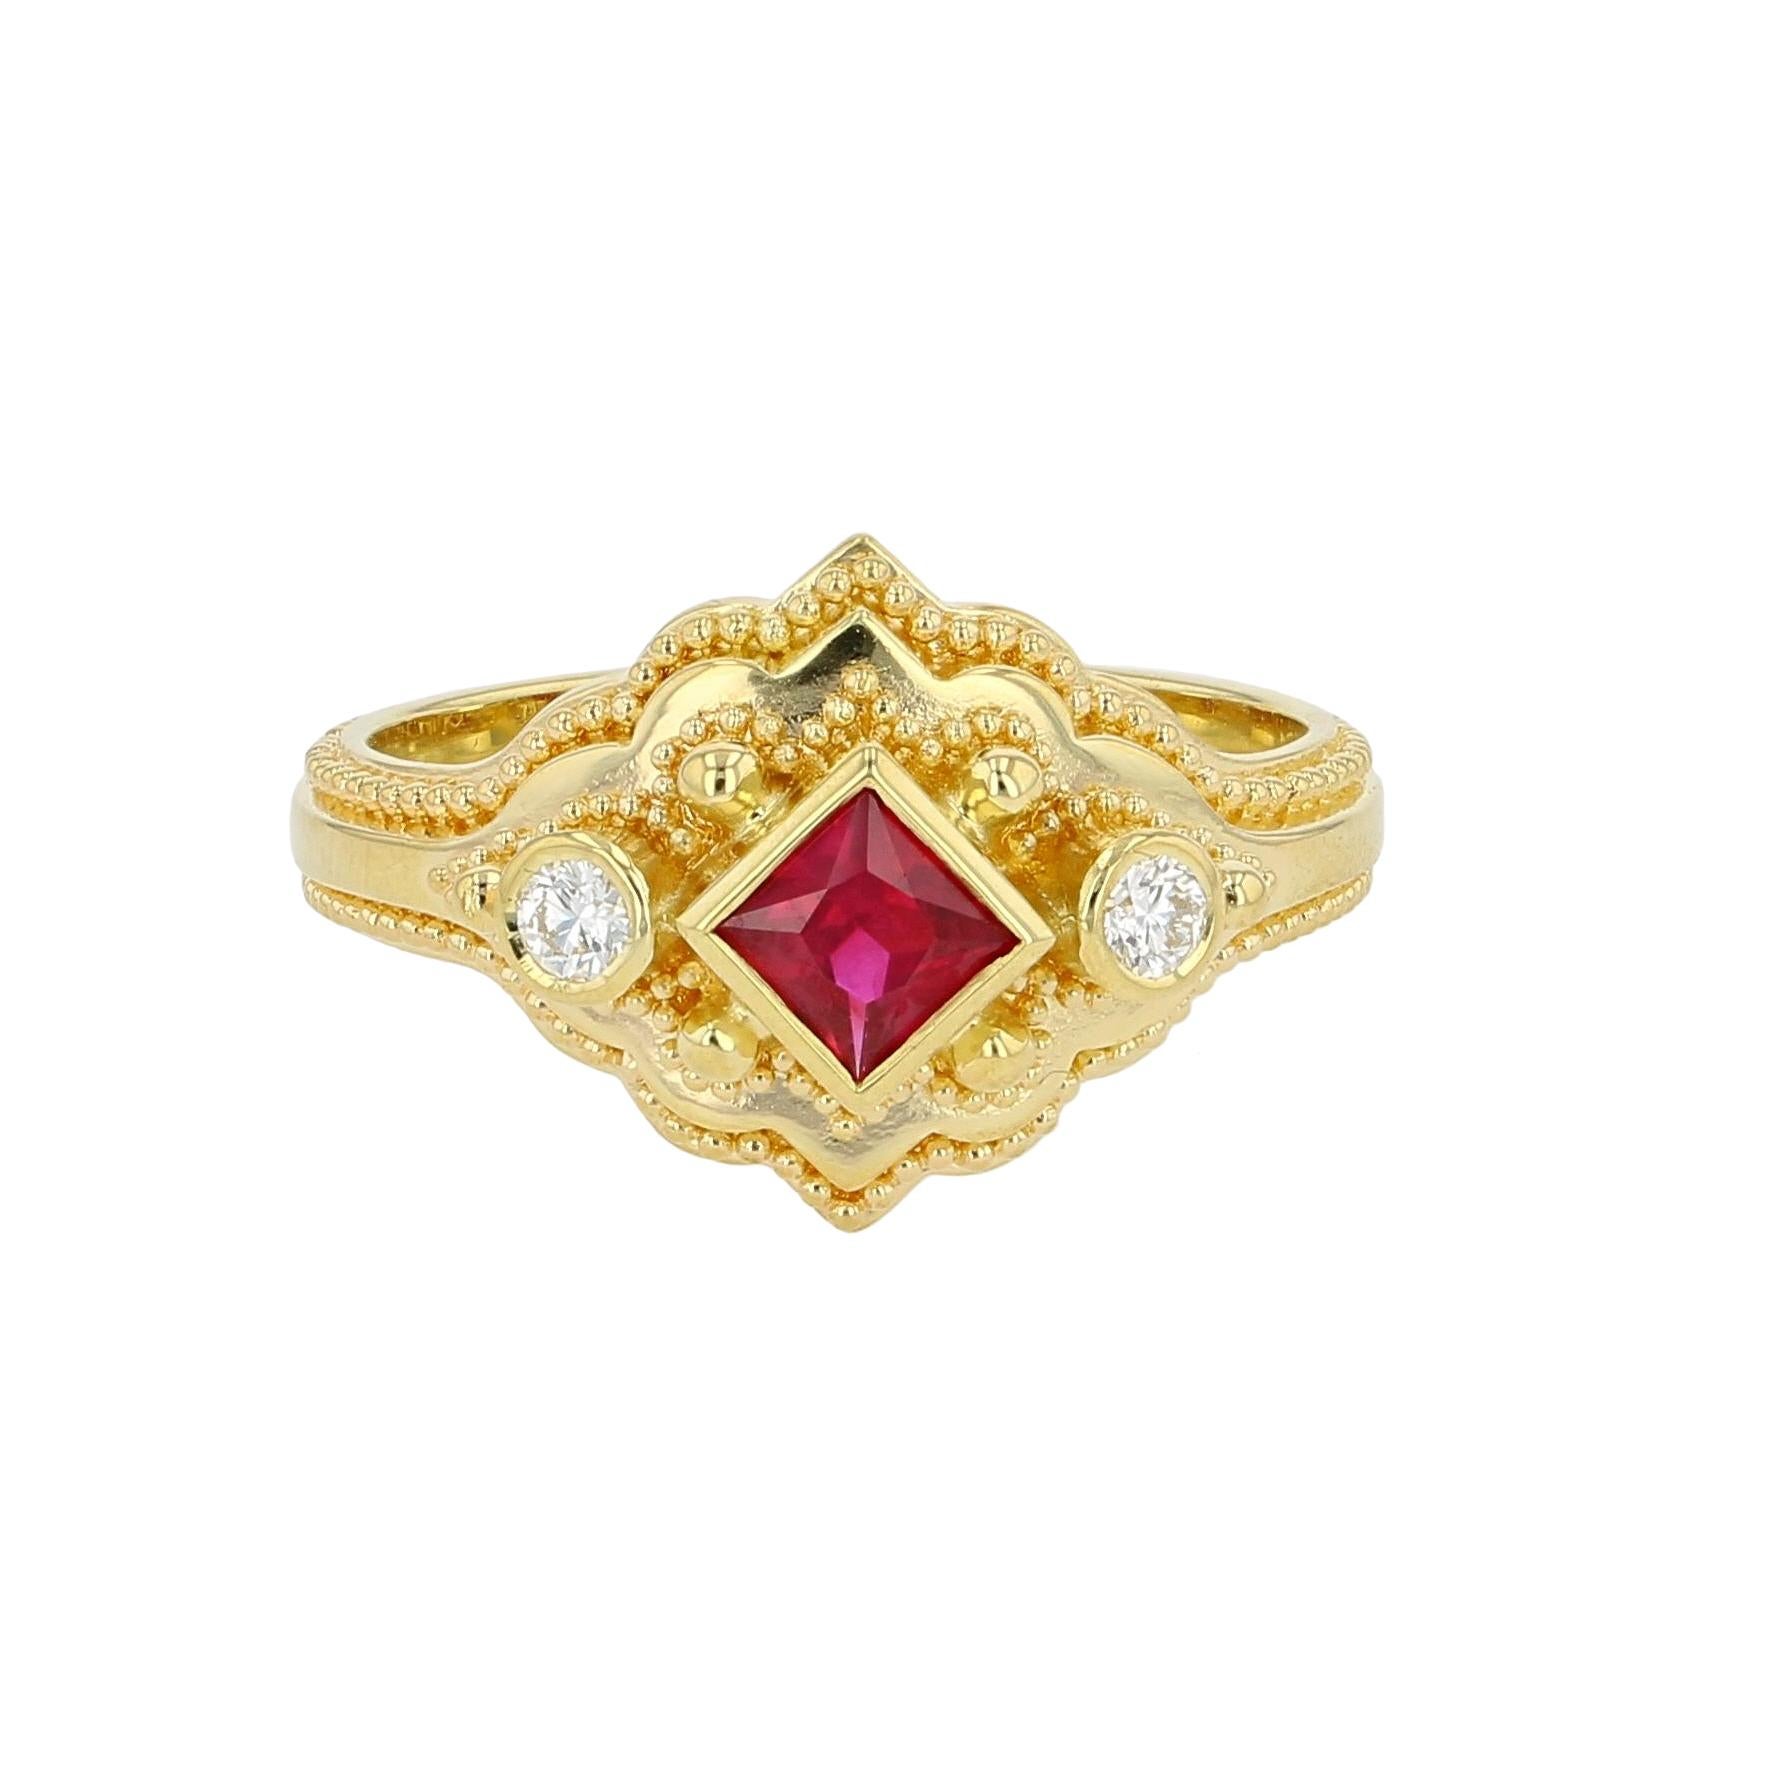 With a Princess Cut Ruby at its apex, this three stone ring tells the story of Kent's unique style. You can see here that we have first a band of gold, with detail set around yet another band of gold. Atop that, another layer of fine granulation